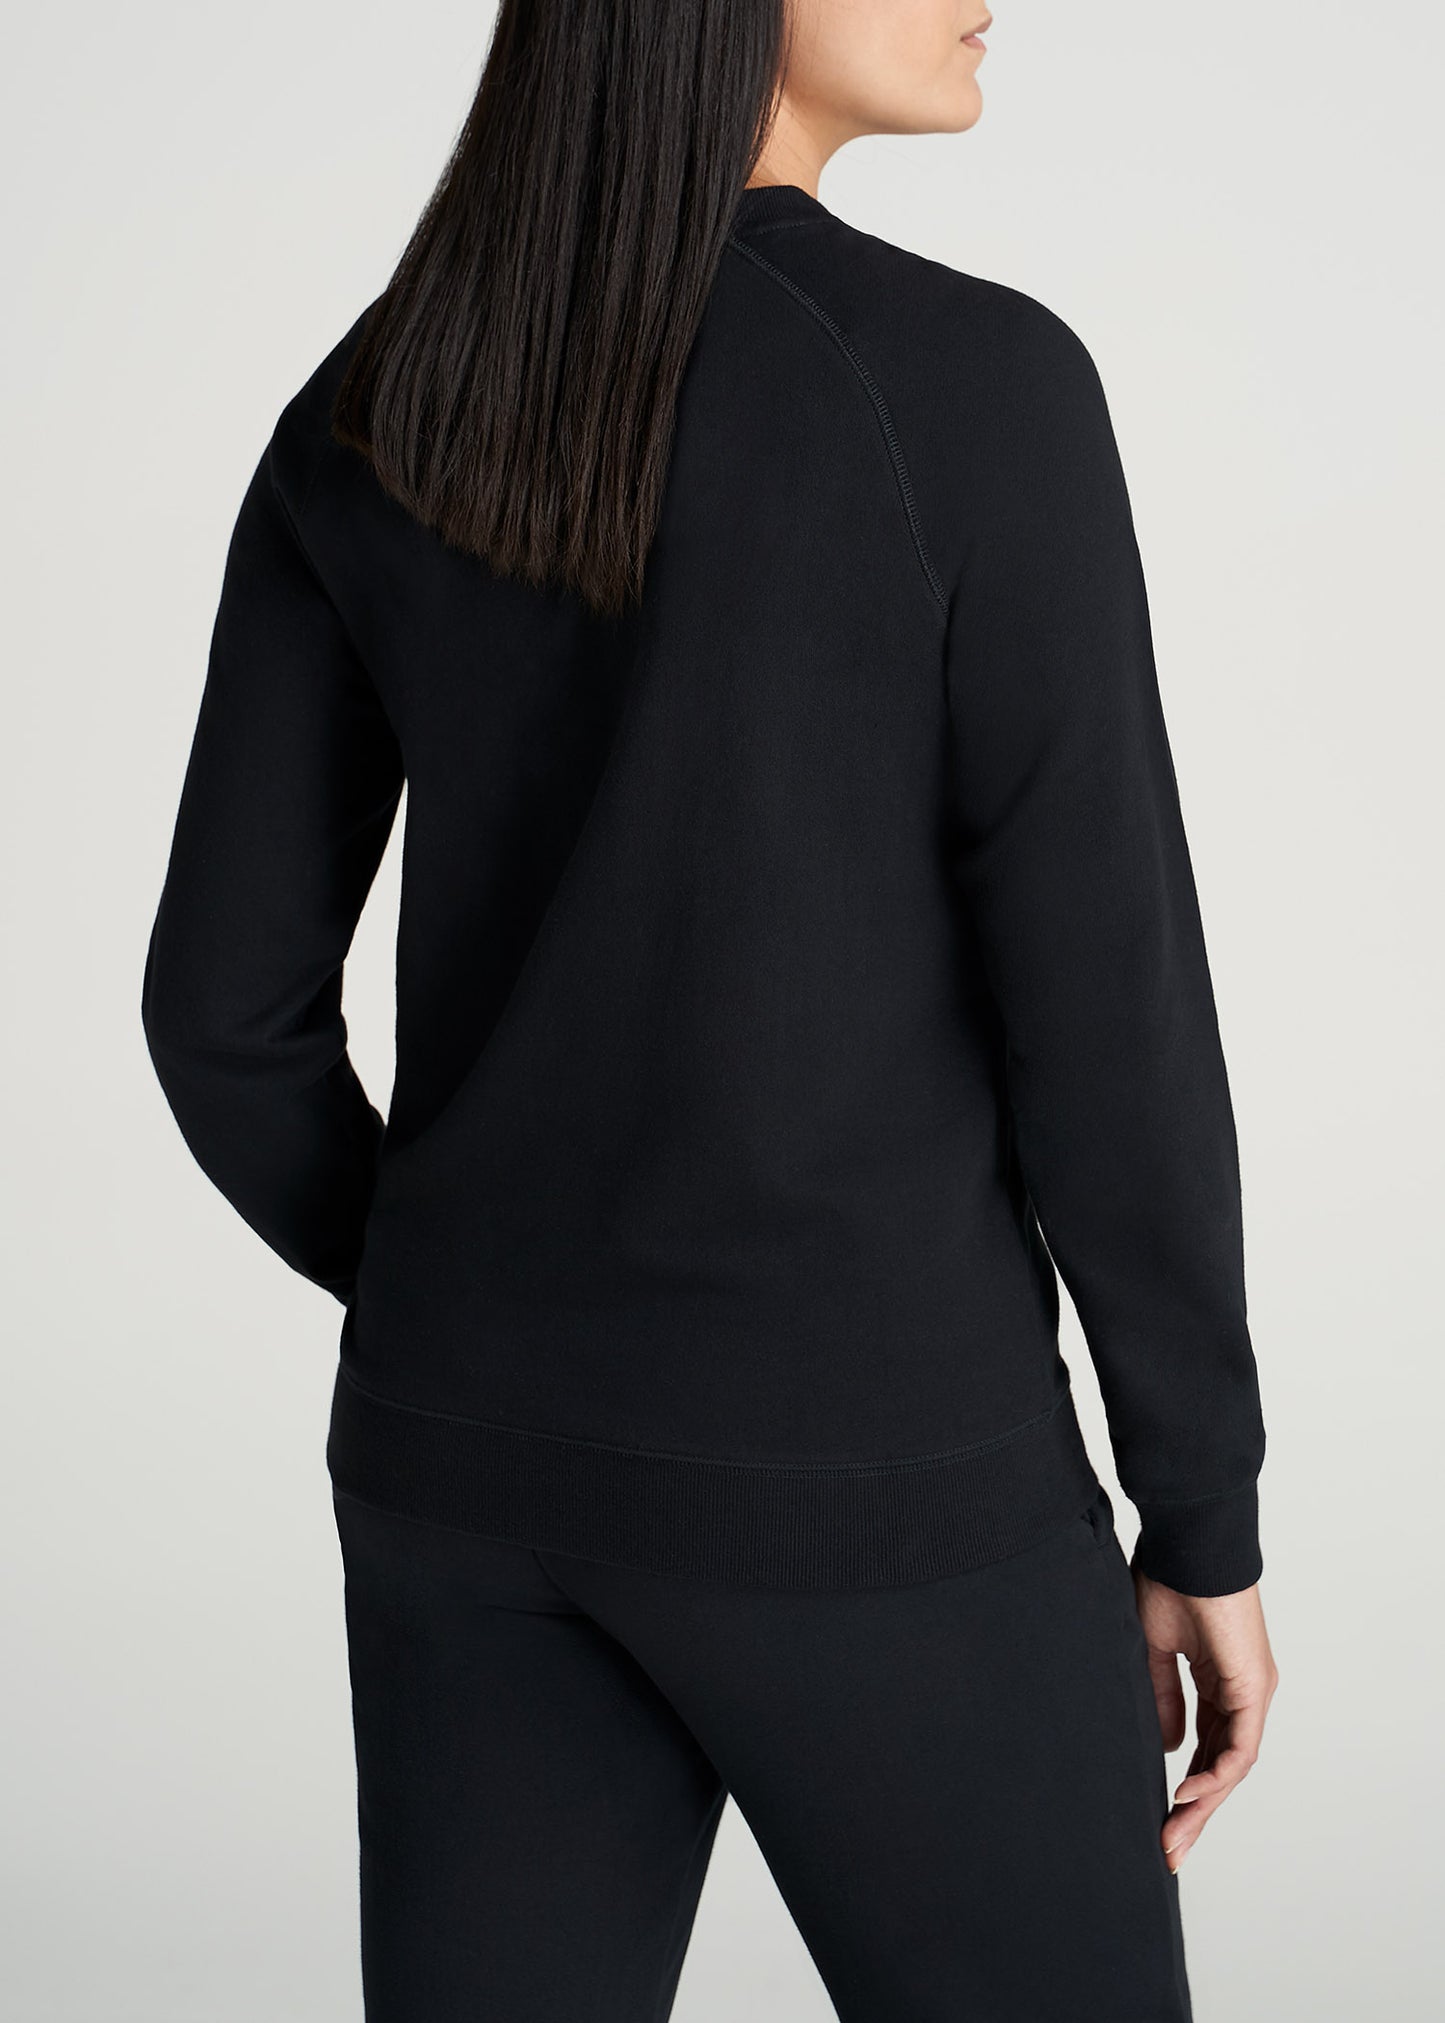 American-Tall-Women-Womens-FrenchTerry-CrewNeck-Black-back